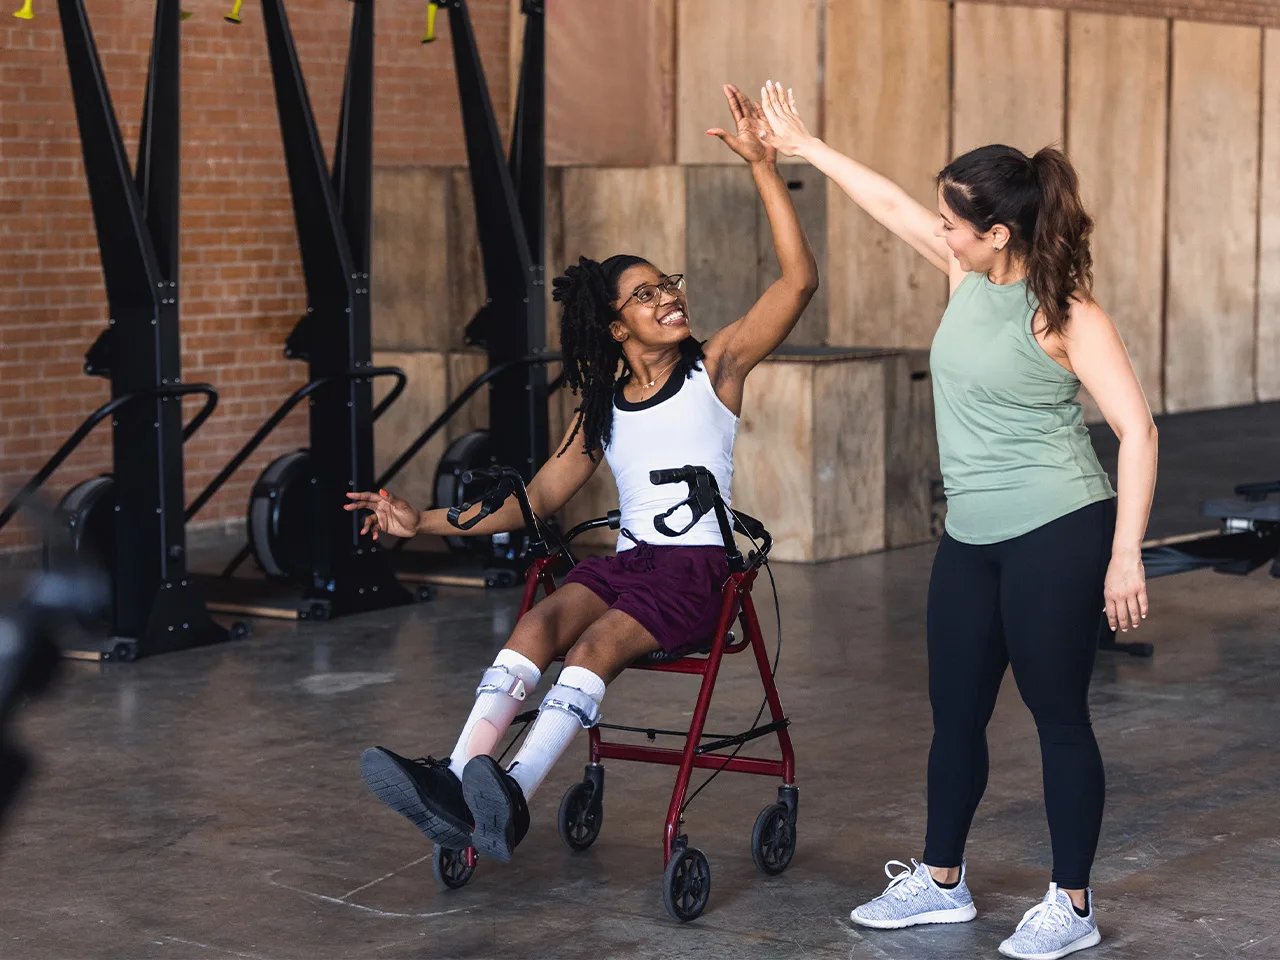 A woman using a mobility device high-fives a woman standing next to her.